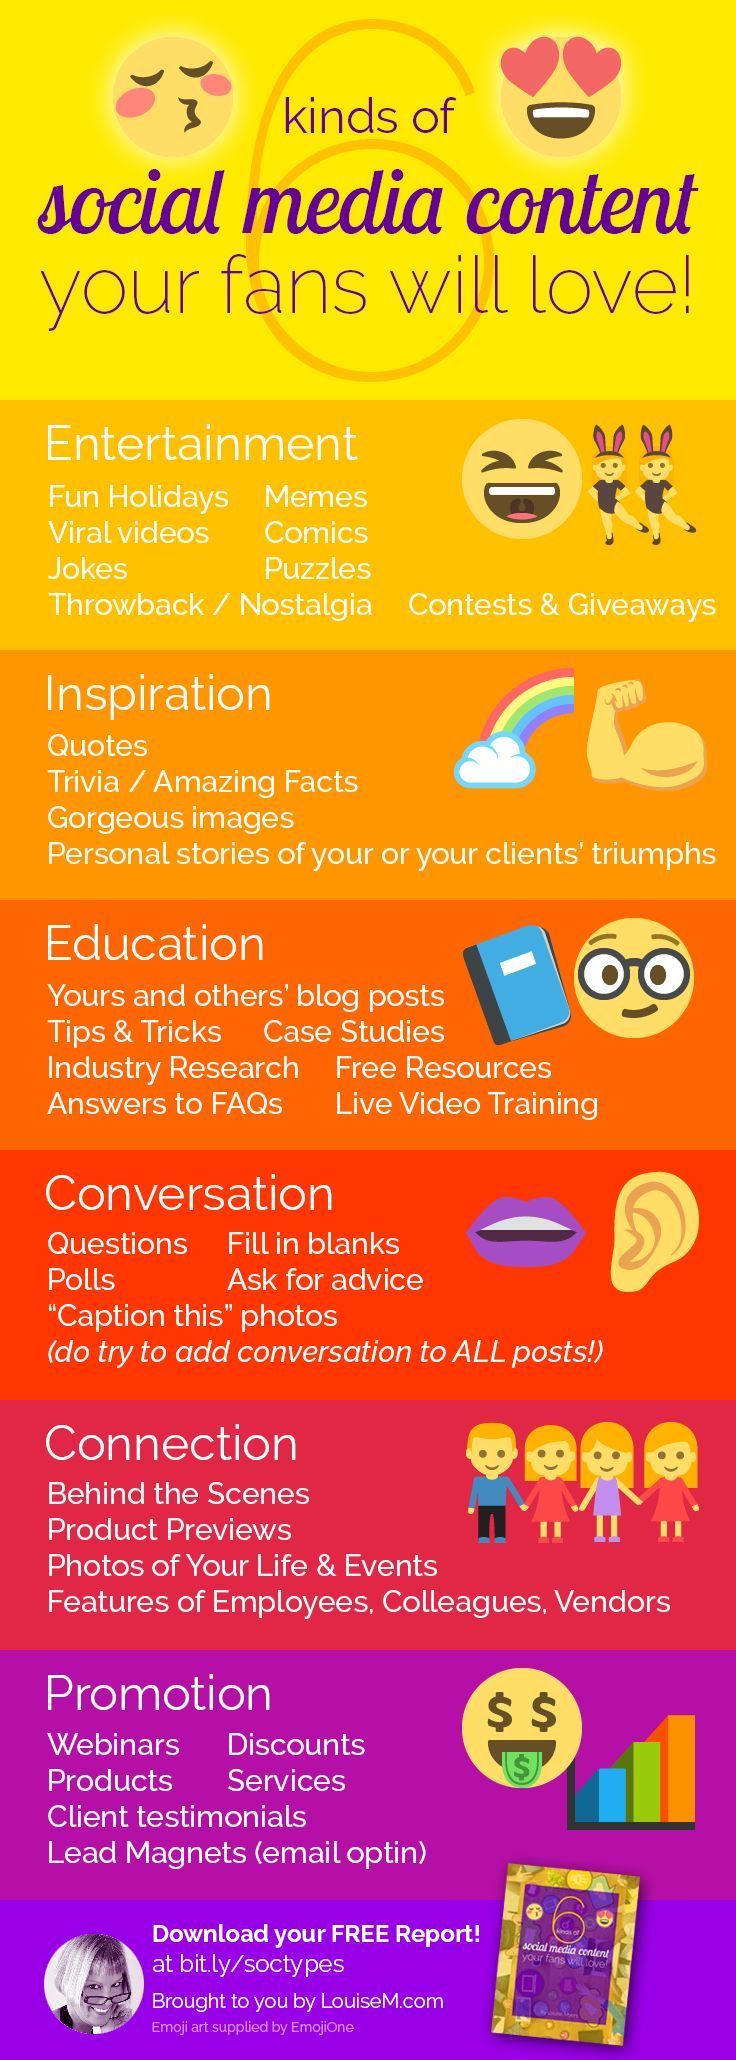 Marketing-Infographic-Social-media-marketing-tips-Click-to-blog-for-FREE-download-with-content-catego Marketing Infographic : Social media marketing tips: vary your content categories to keep your followers...